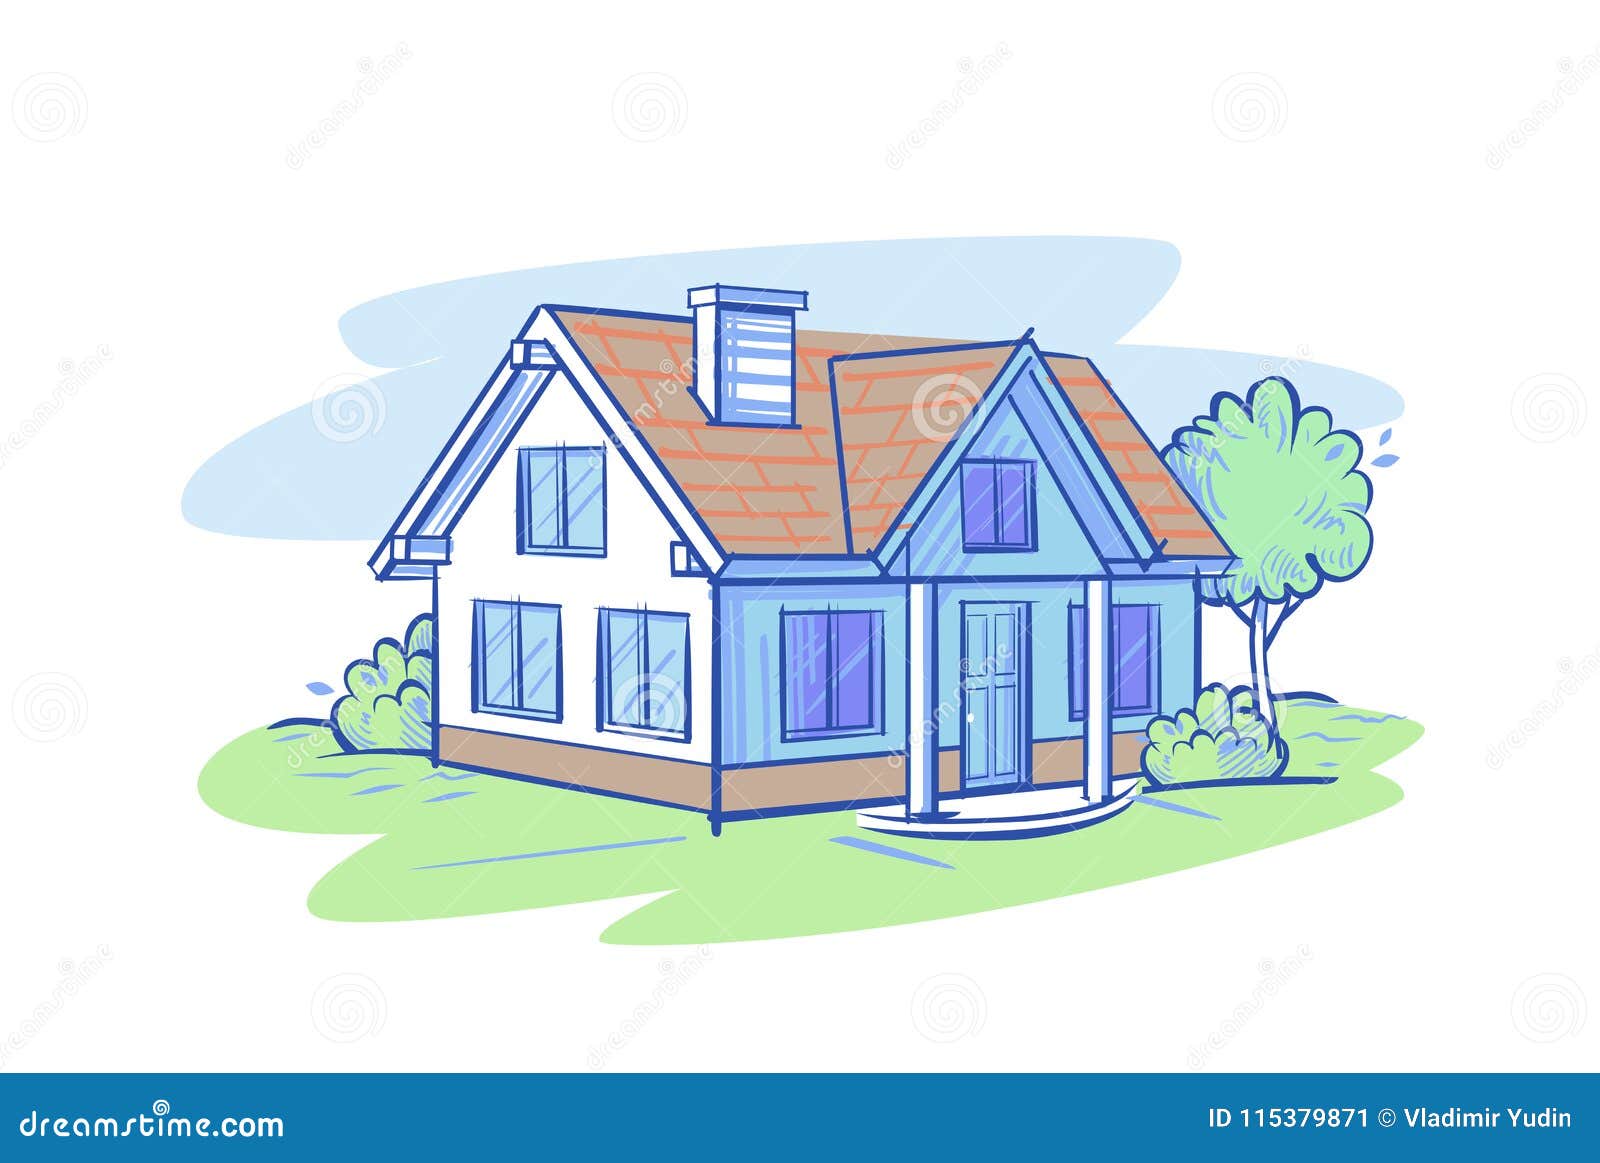 Russian village house color sketch hand drawn Vector Image